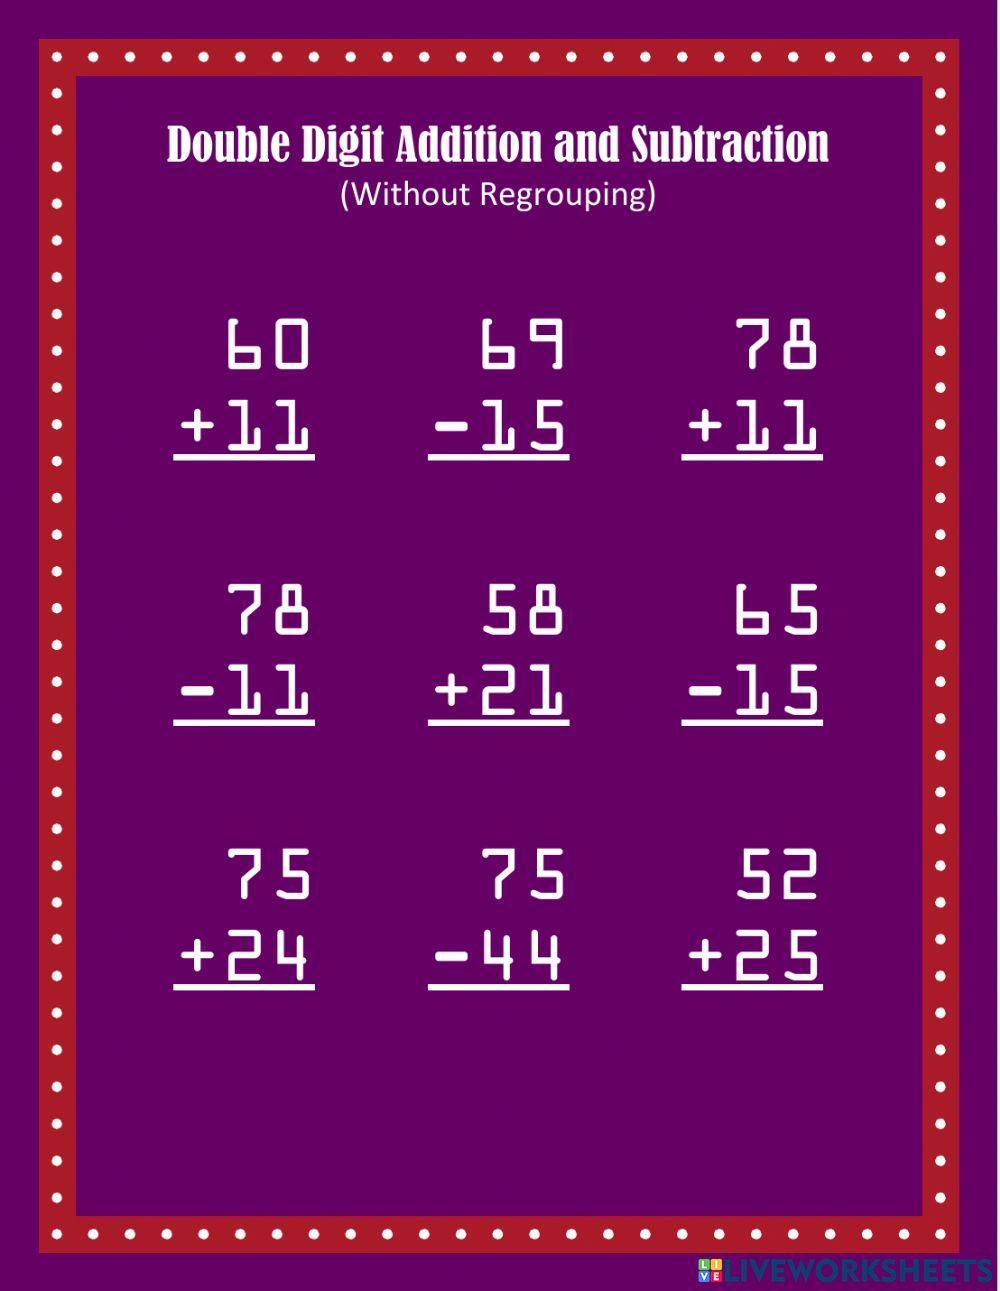 Double Digit Addition and Subtraction Set 10